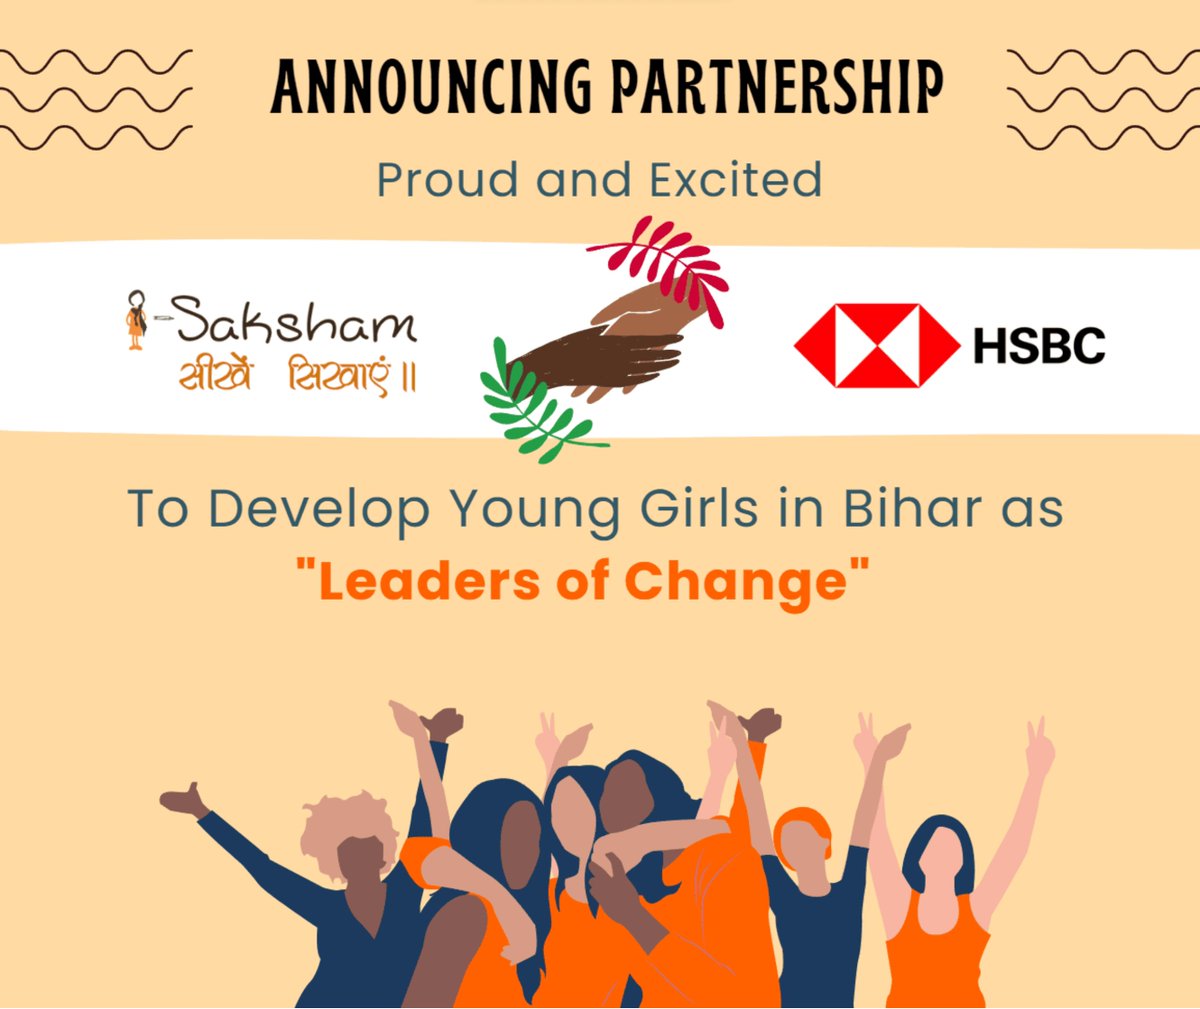 Proud to partner with @HSBC to empower & develop young girls of #Bihar as future 'Leaders of Change' to promote *'Voice & Choice' #CSR partnership would provide them with comprehensive support, break barriers, & be nurtured @AnilAgarwal_Ved @anandmahindra @iSakshamWork @SonuSood